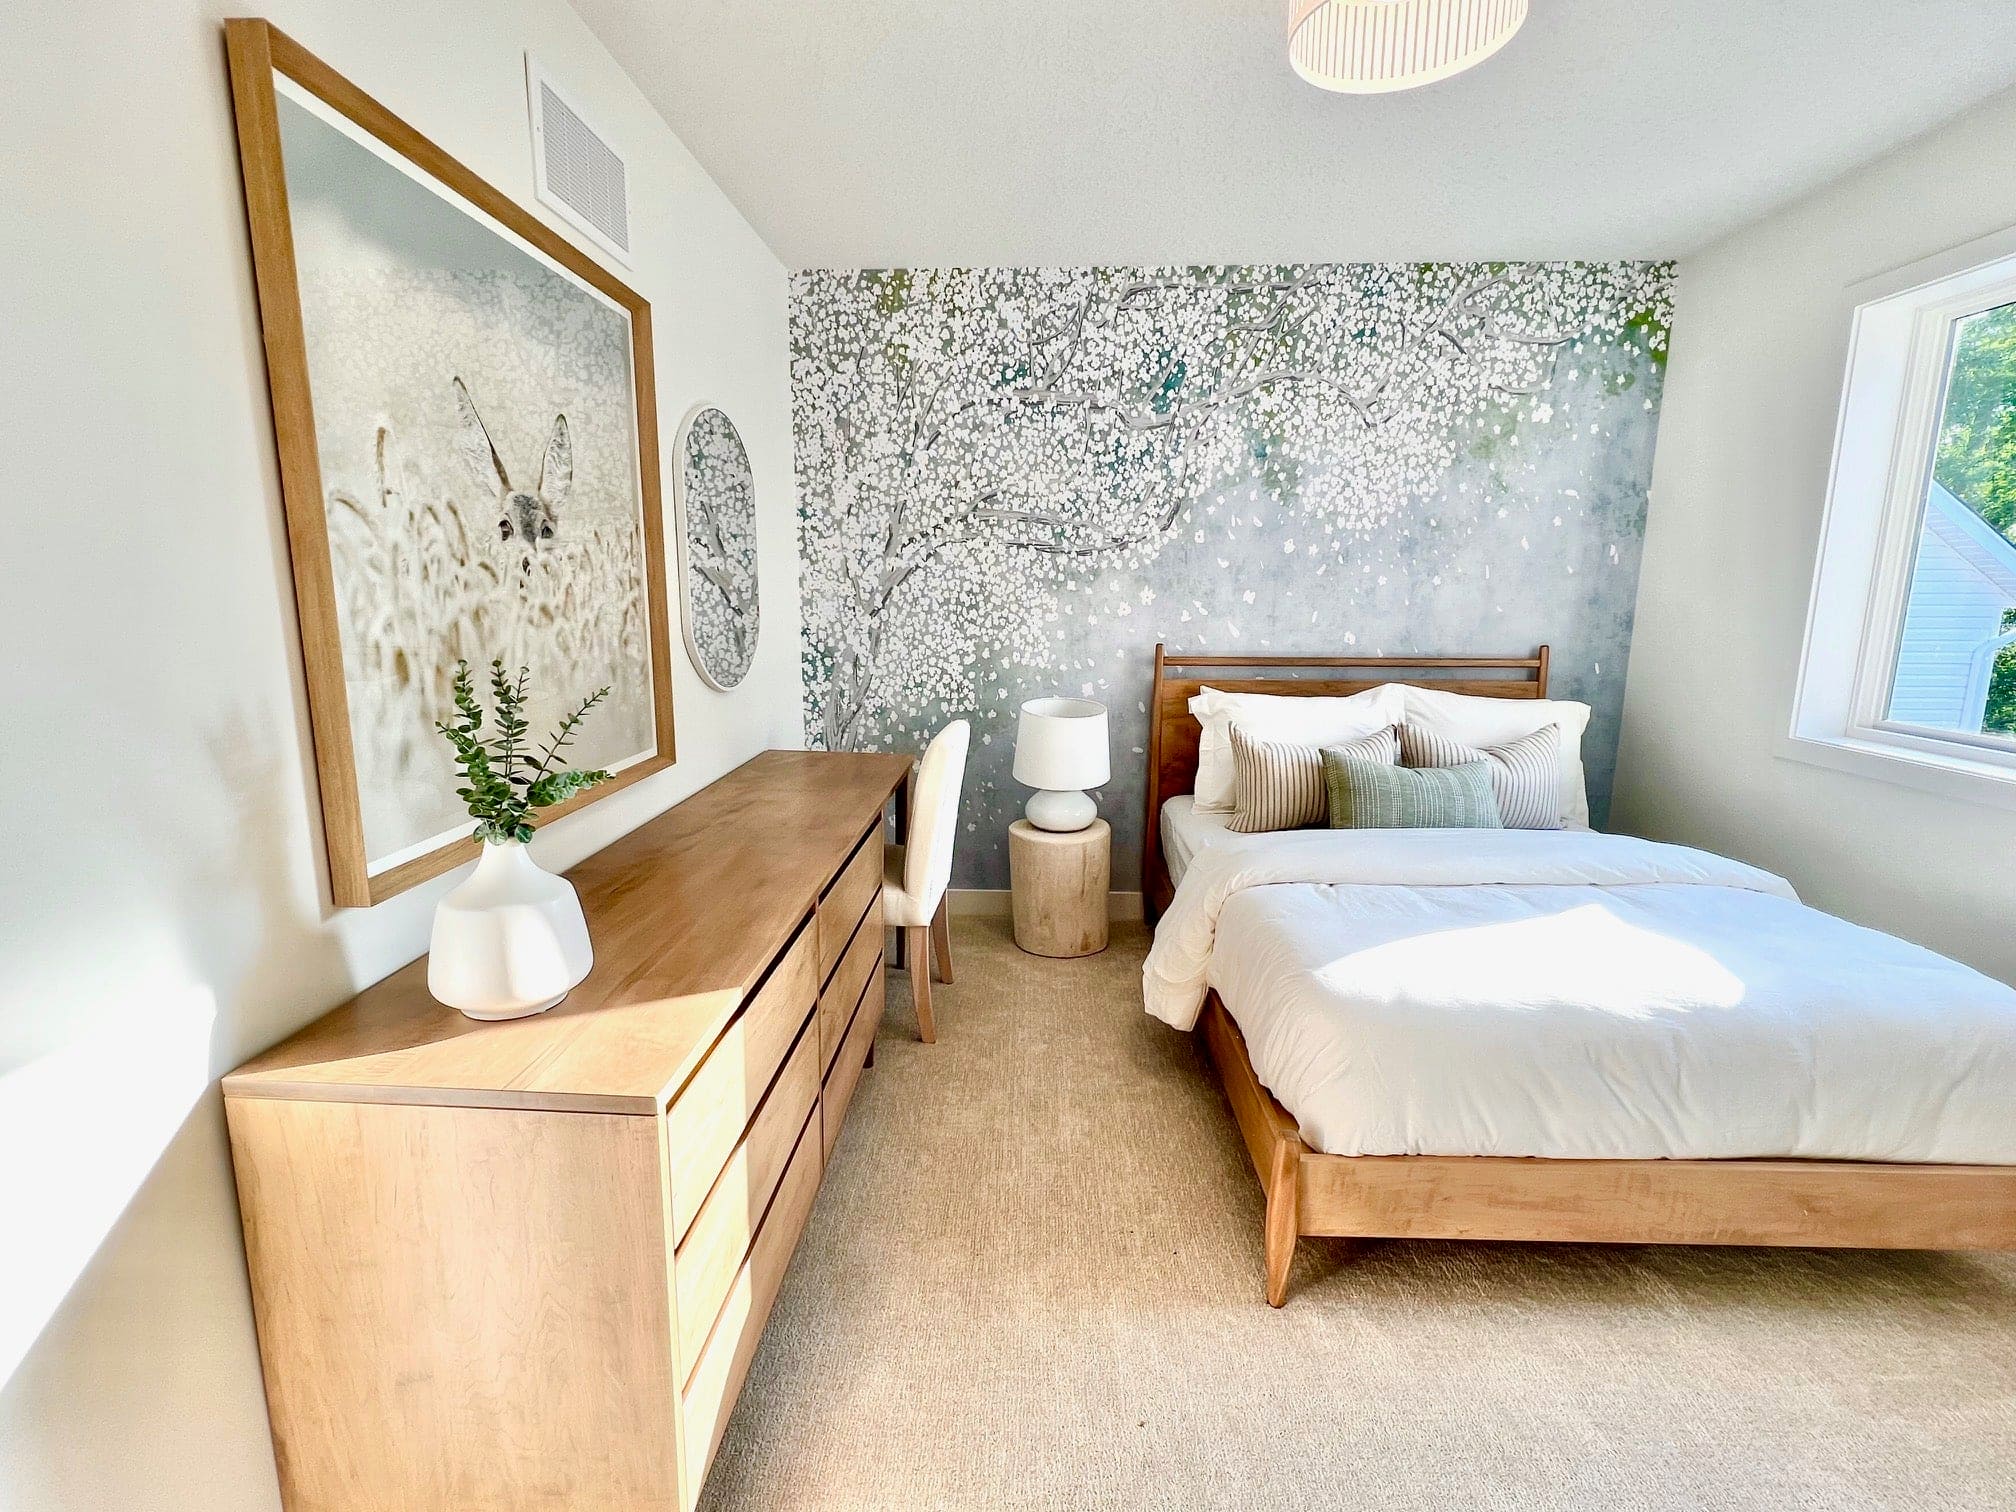 A bright bedroom with a natural wood bed and furniture, accented by the Nursery Mural Wallpaper depicting a lush cherry blossom canopy. The gentle pastel colors of the blooms add a serene and spring-like atmosphere to the room